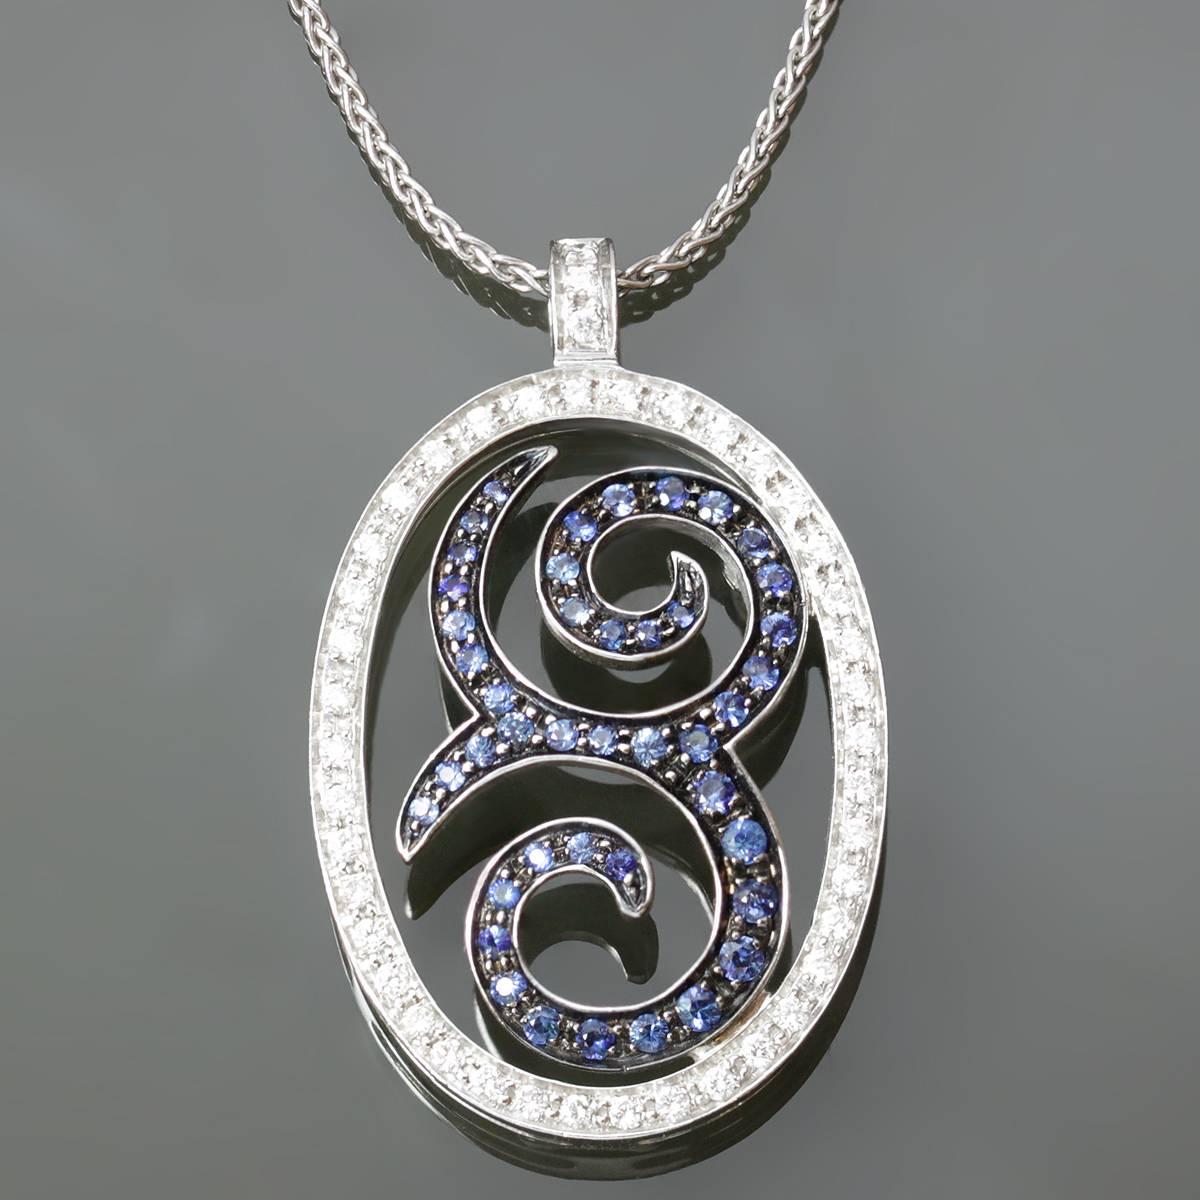 This modern wheat chain necklace is made in 18k yellow gold and features an open pendant with a swirl motif set with faceted round blue sapphires of an estimated 0.69 carats and surrounded by an oval frame set with sparkling round diamonds of an